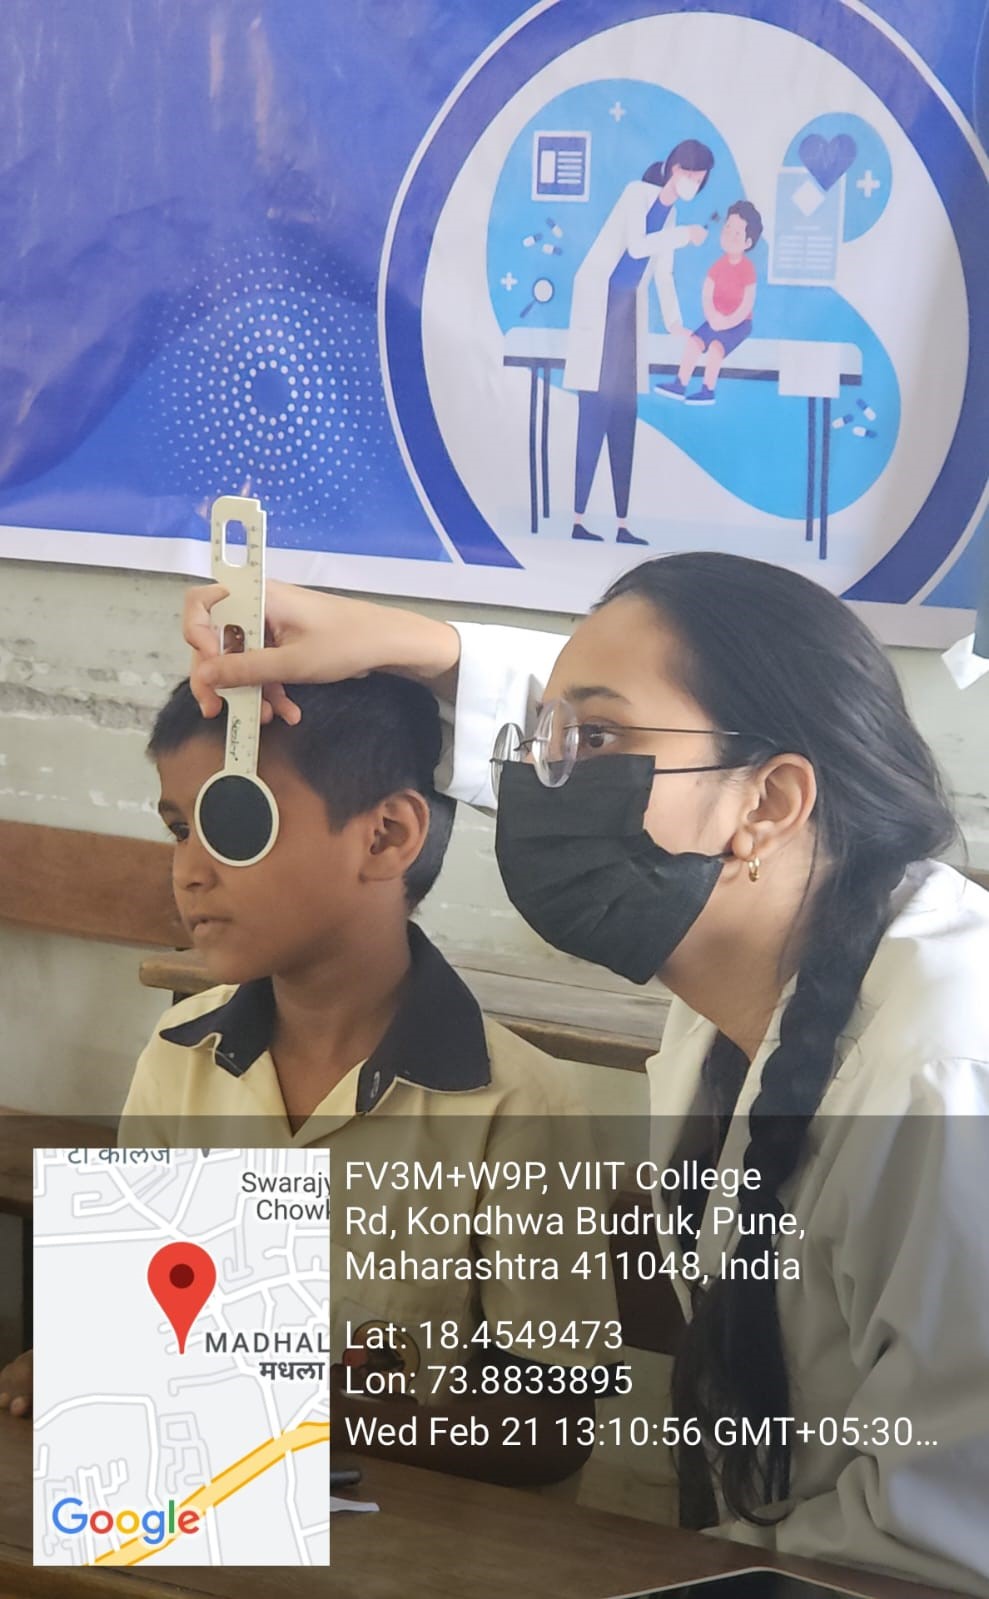 CSC Bal Swasthya camp in collaboration with BV(DU), School of Optometry, Pune